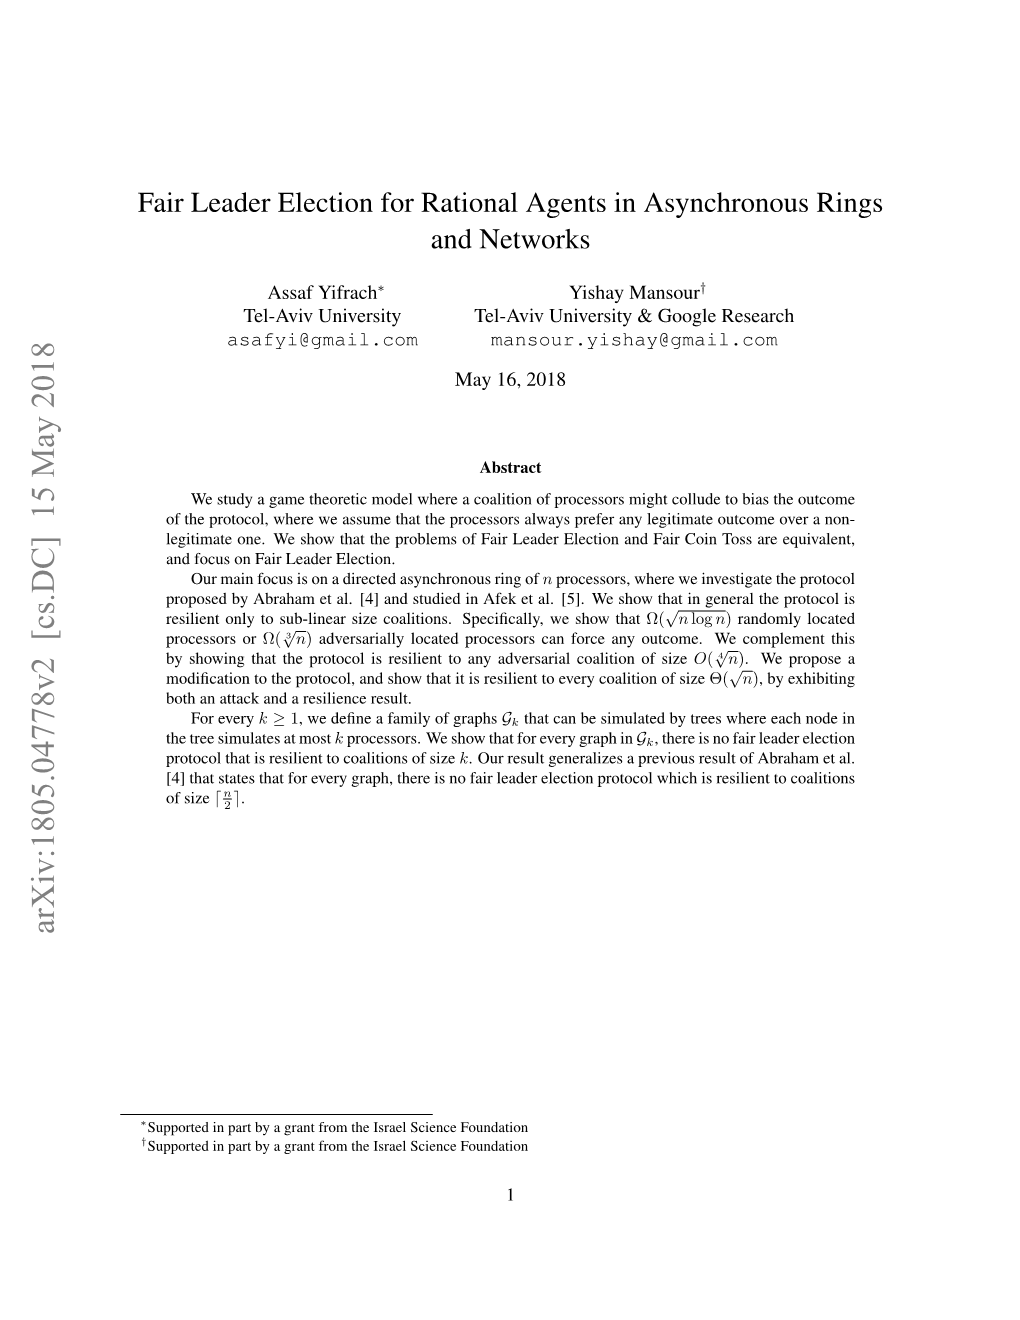 Fair Leader Election for Rational Agents in Asynchronous Rings and Networks